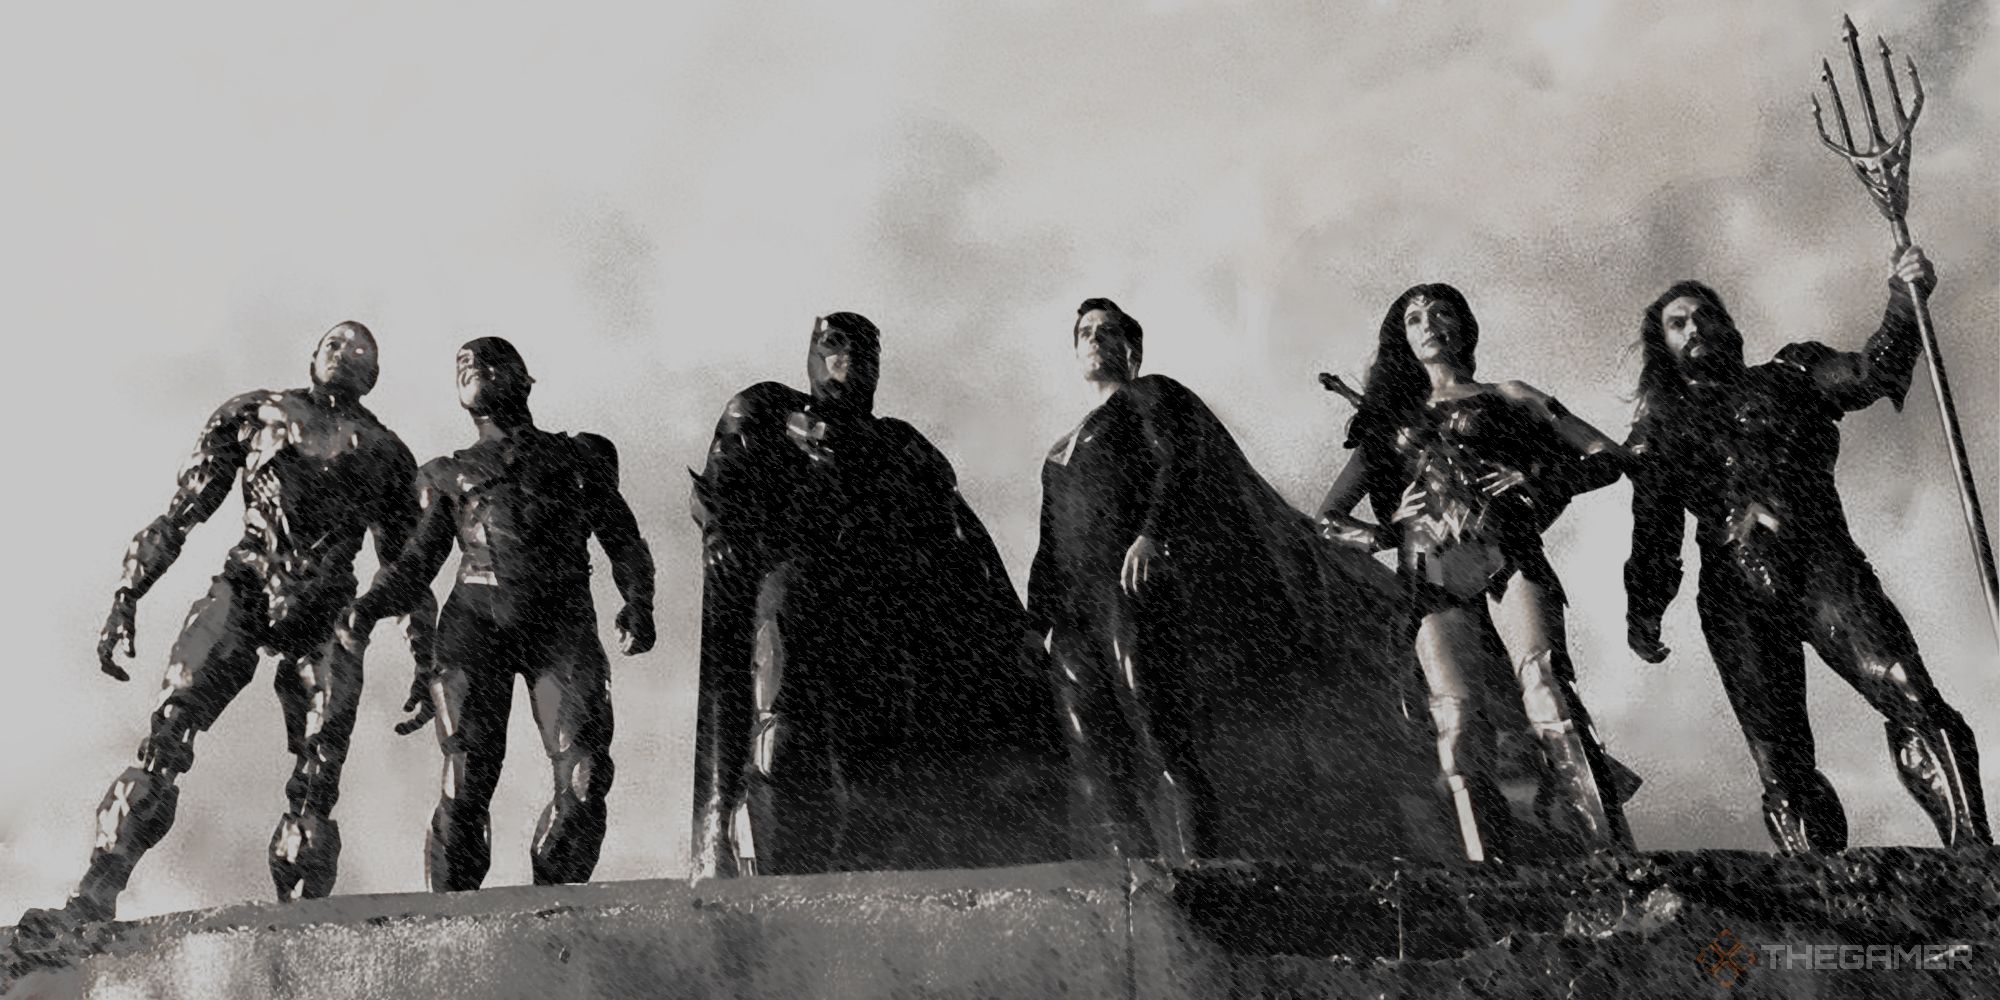 Snyderverse justice league in greyscale 